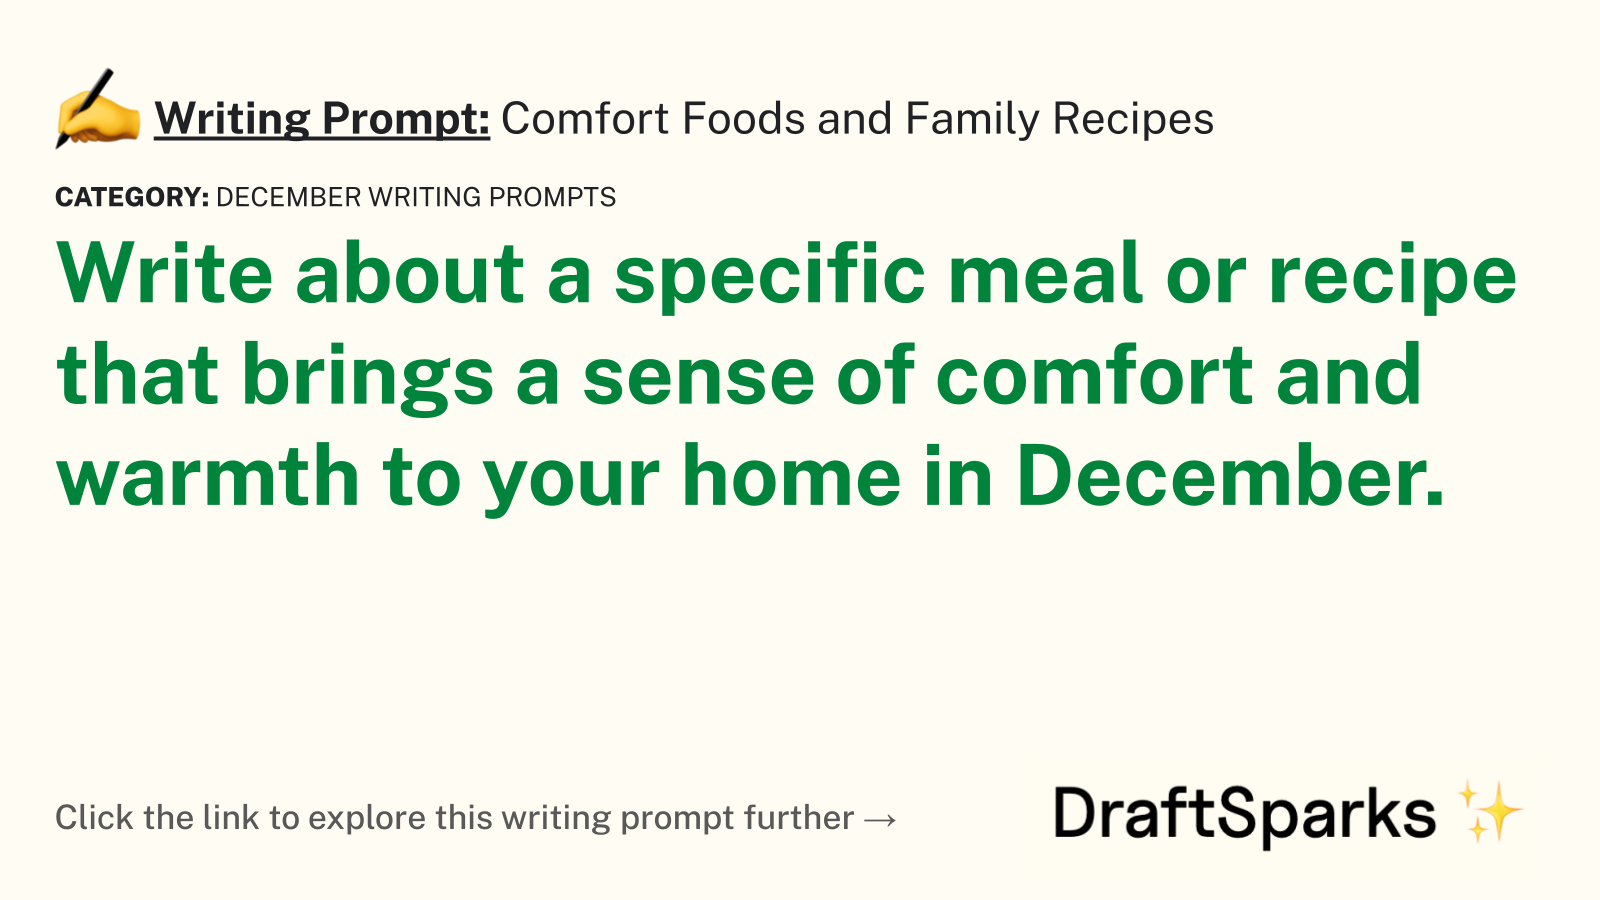 Comfort Foods and Family Recipes